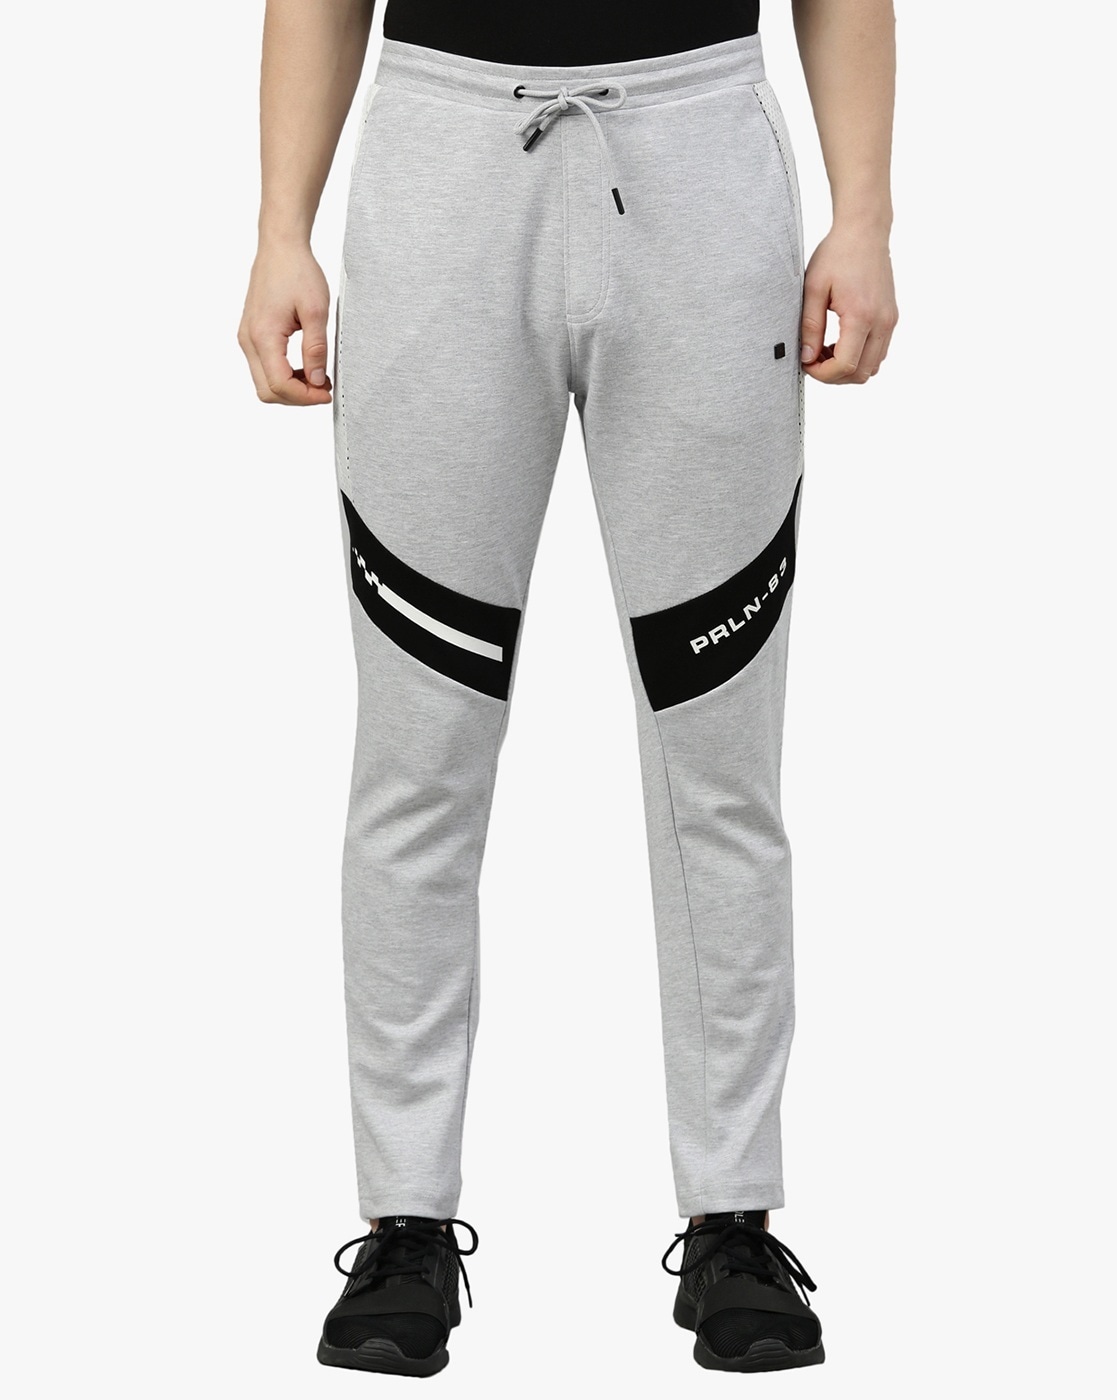 Proline S Gym Pant - Get Best Price from Manufacturers & Suppliers in India